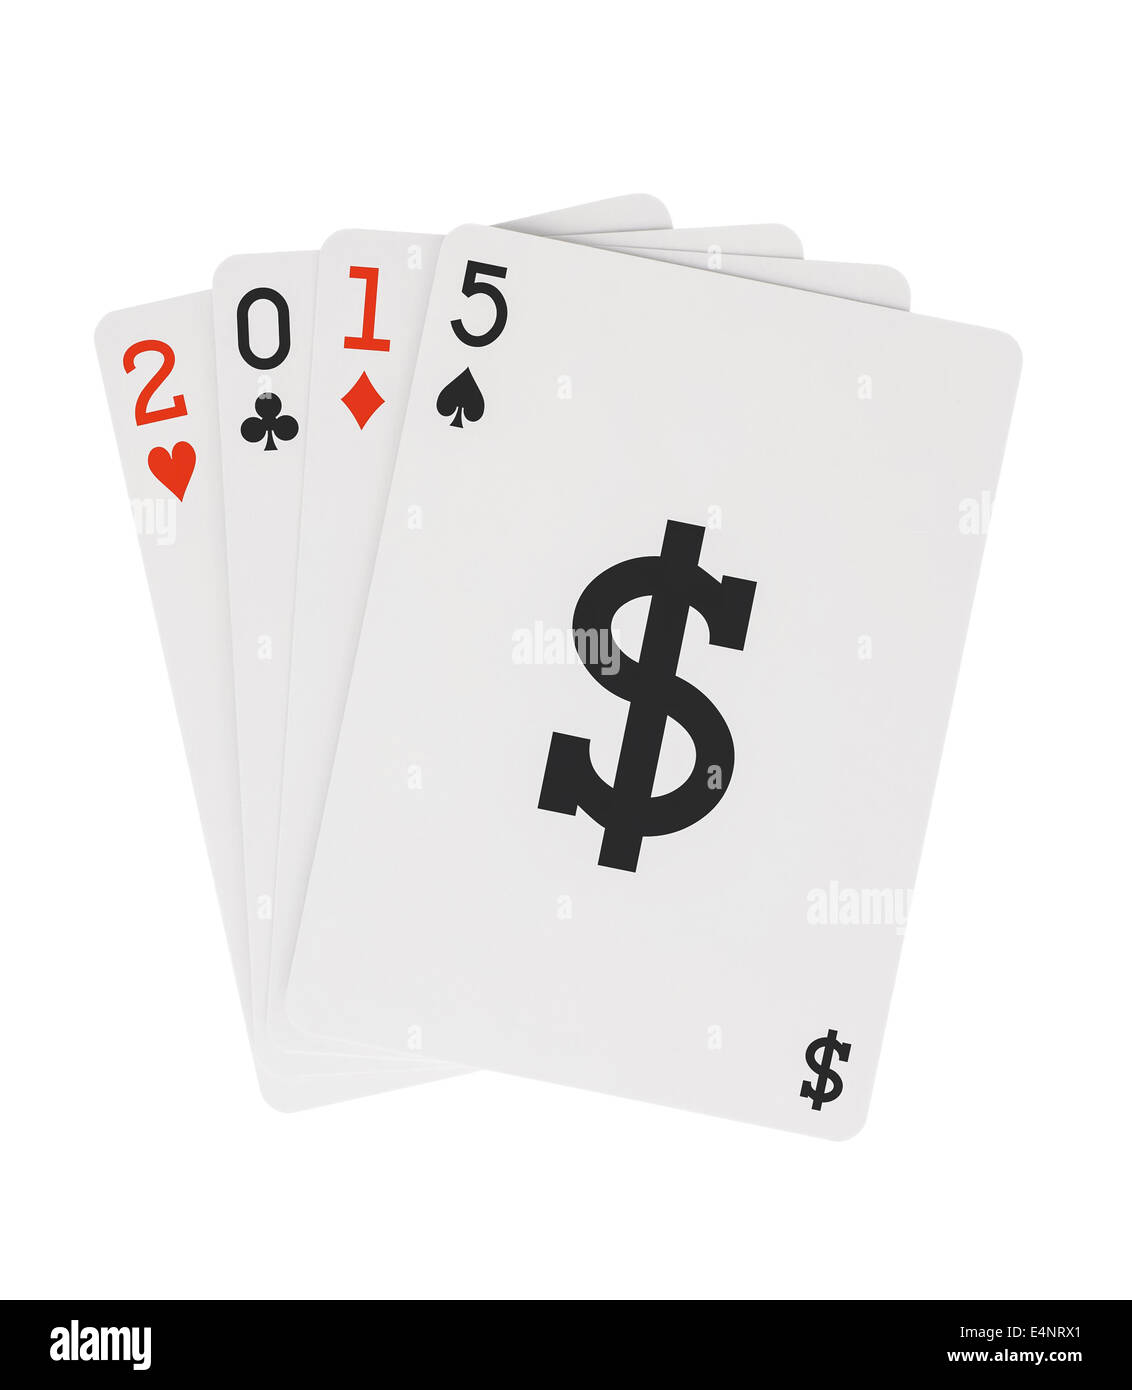 Year 2015 Playing Cards with Dollar Sign Symbol Stock Photo